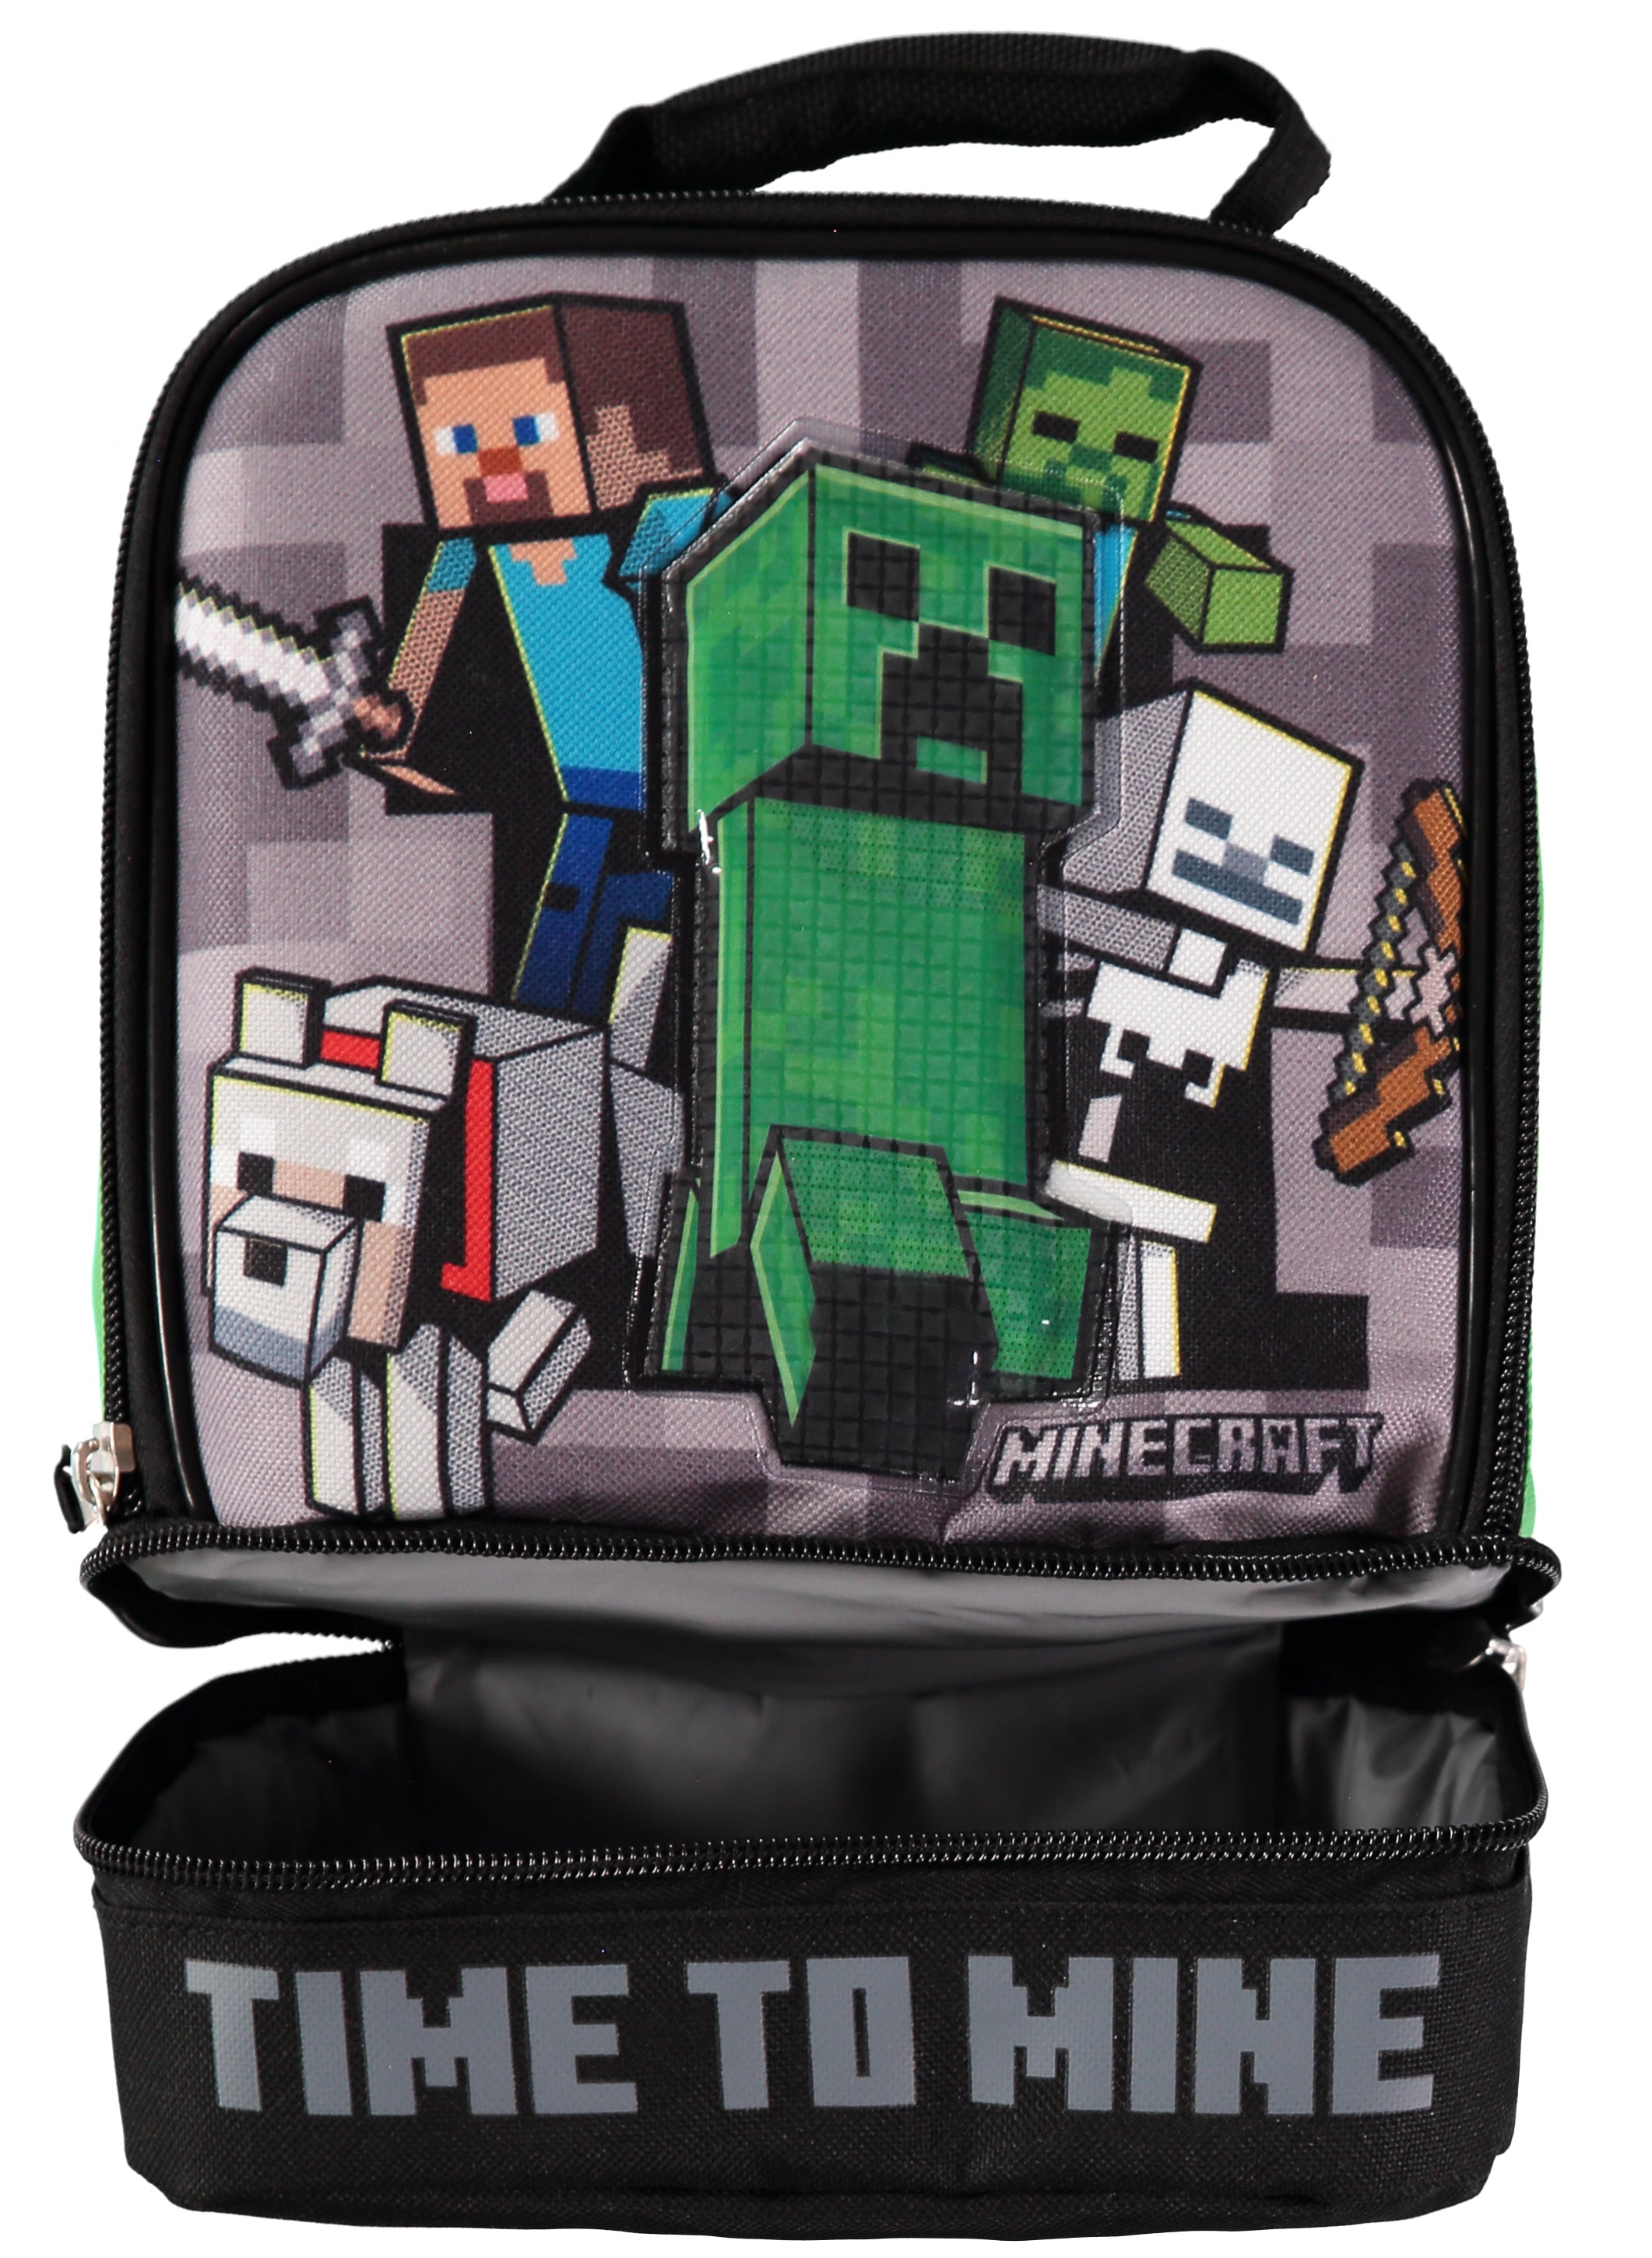 Minecraft Creeper Lunch Box Dual Compartment Insulated Lunch Kit